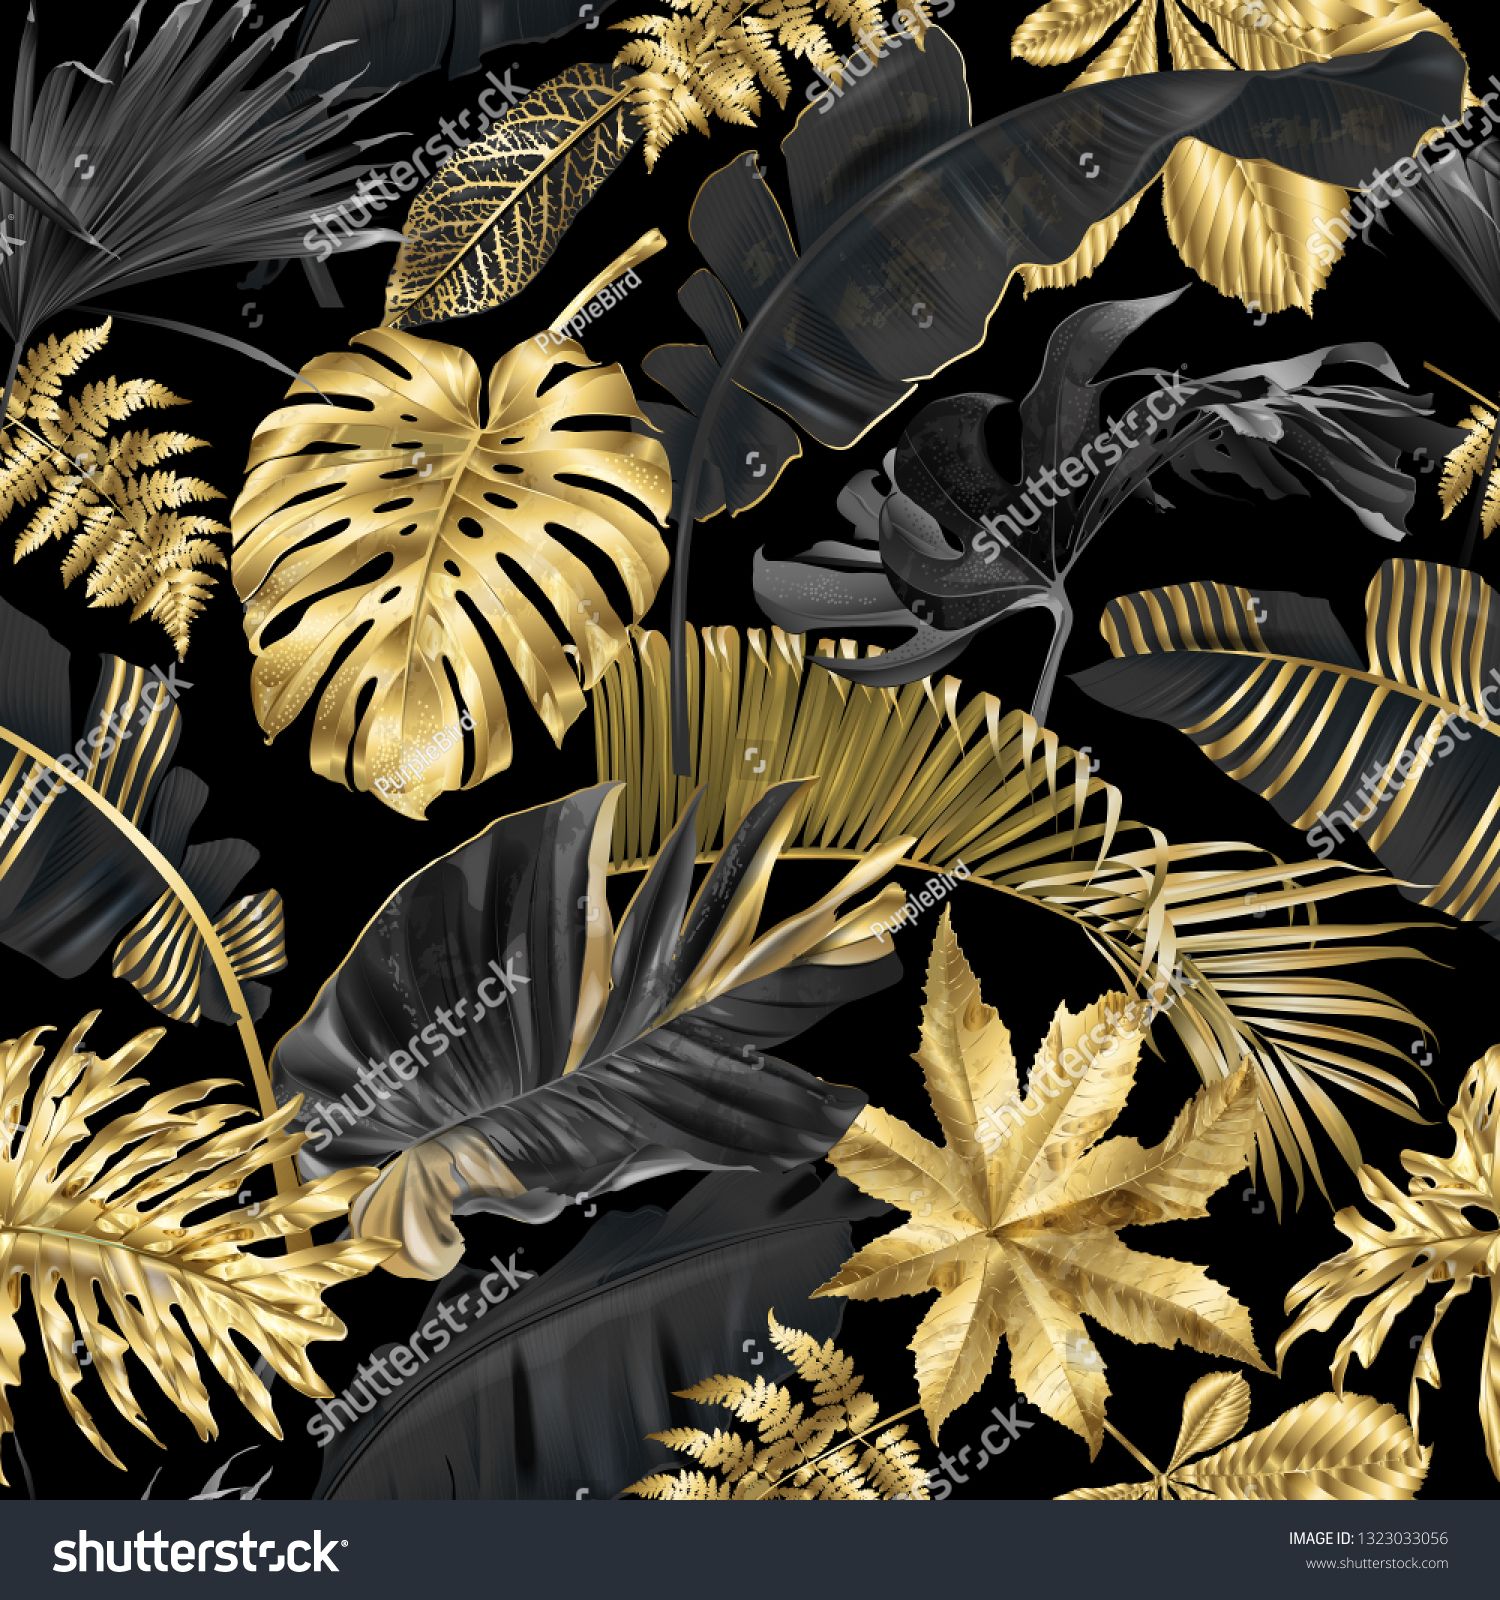 Vector seamless pattern with gold and black tropical leaves on dark background. Exotic botanical background design for cosmetics, spa, textile, hawaiian style shirt. Best as wrapping paper, wallpaper #1323033056